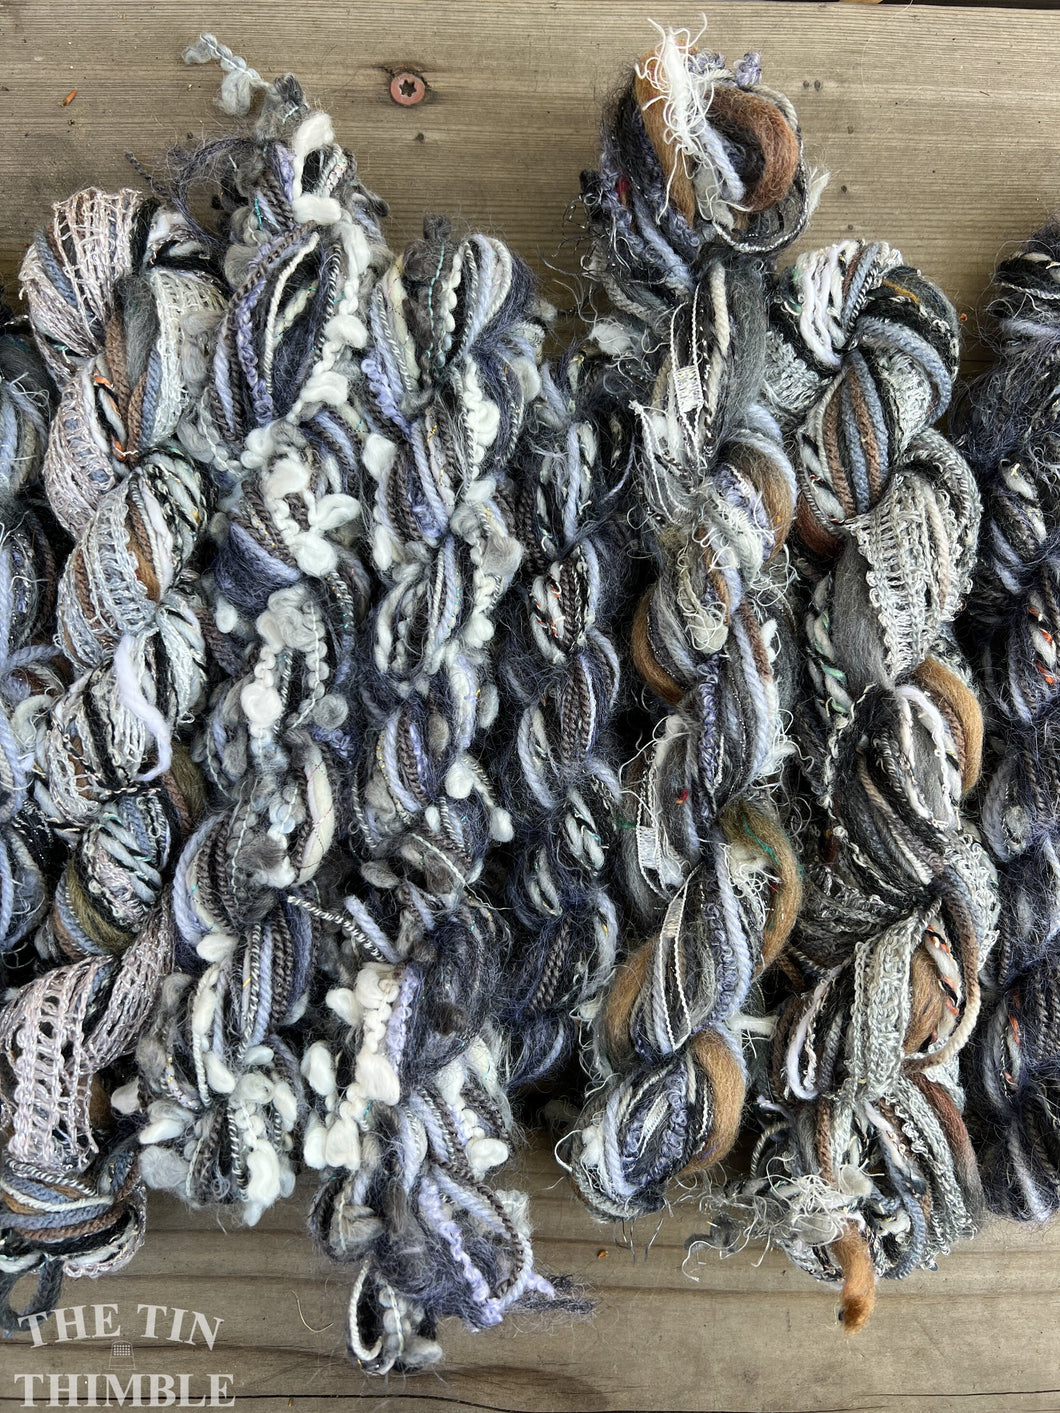 Fiber Frenzy Bundle / Mixed Bundle of Yarn in Grey / Great for Felting / Approximately 24 Yards / 8 Strands Each 3 Yards Long